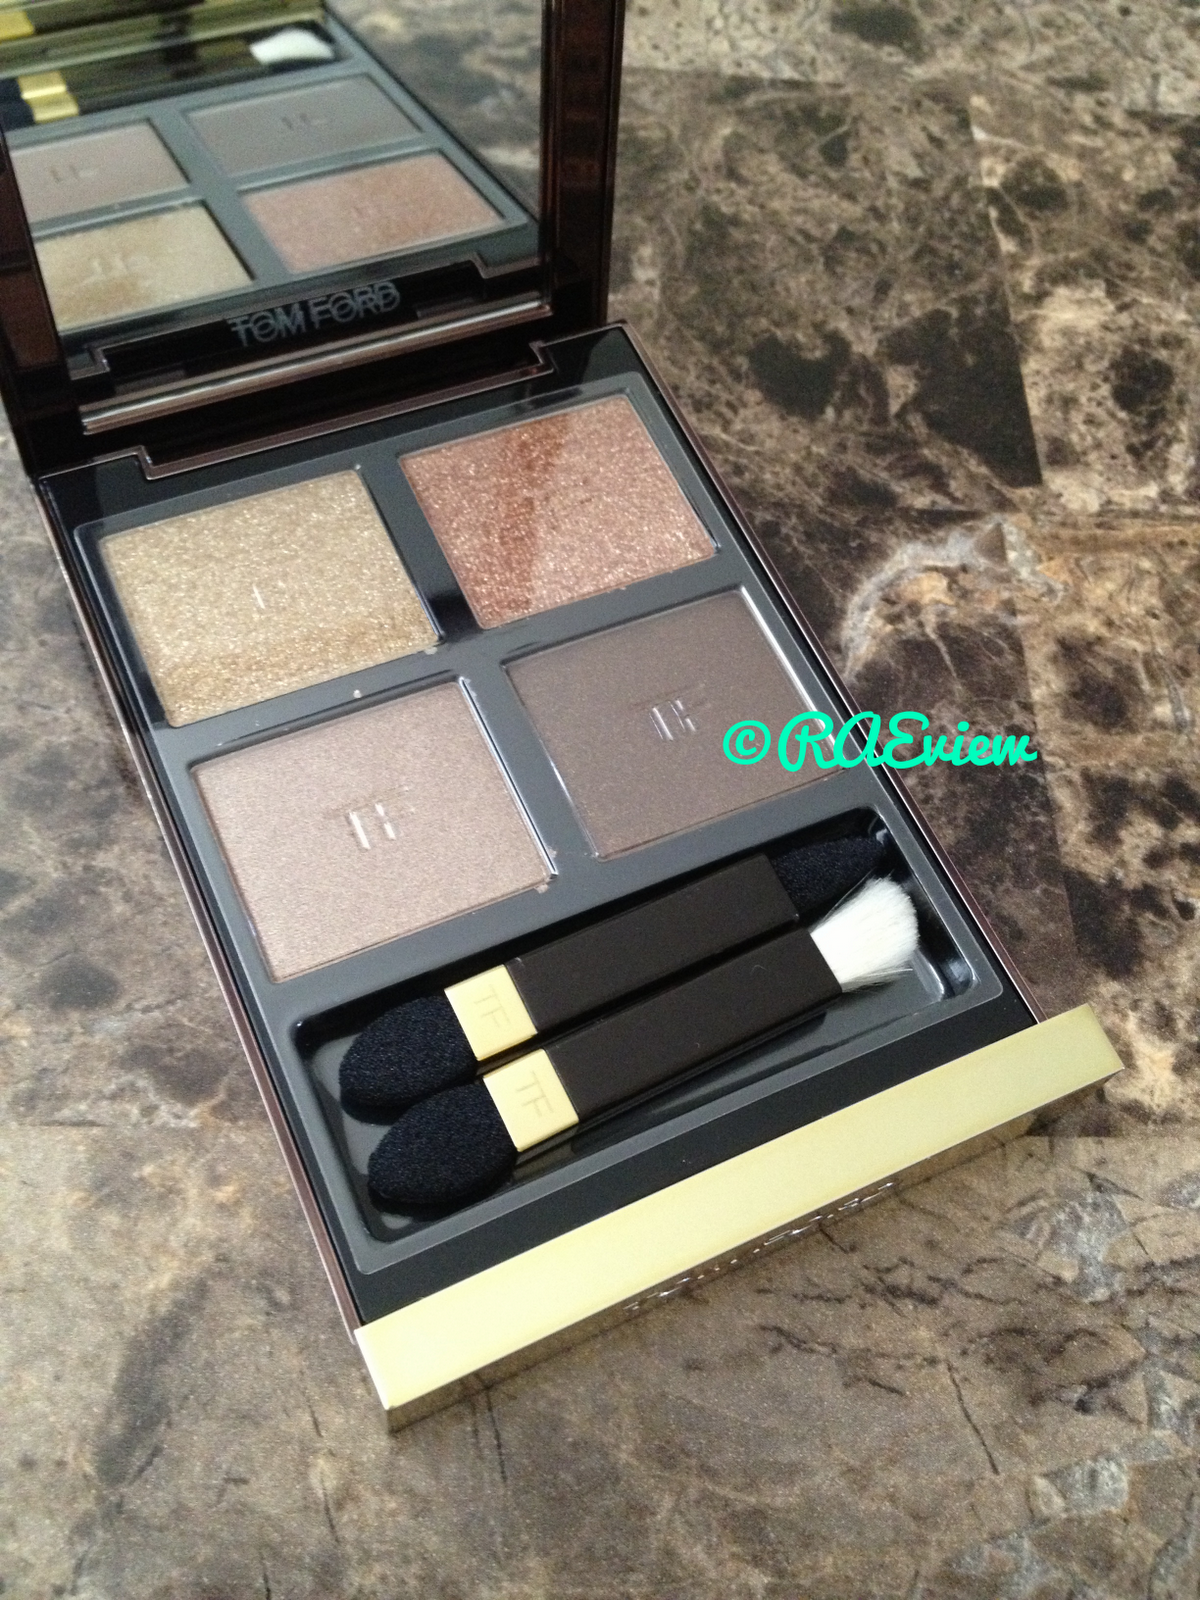 beslutte godtgørelse gammel the raeviewer - a premier blog for skin care and cosmetics from an  esthetician's point of view: Tom Ford Beauty Eye Color Quad in Golden Mink  Review, Photos, Swatches